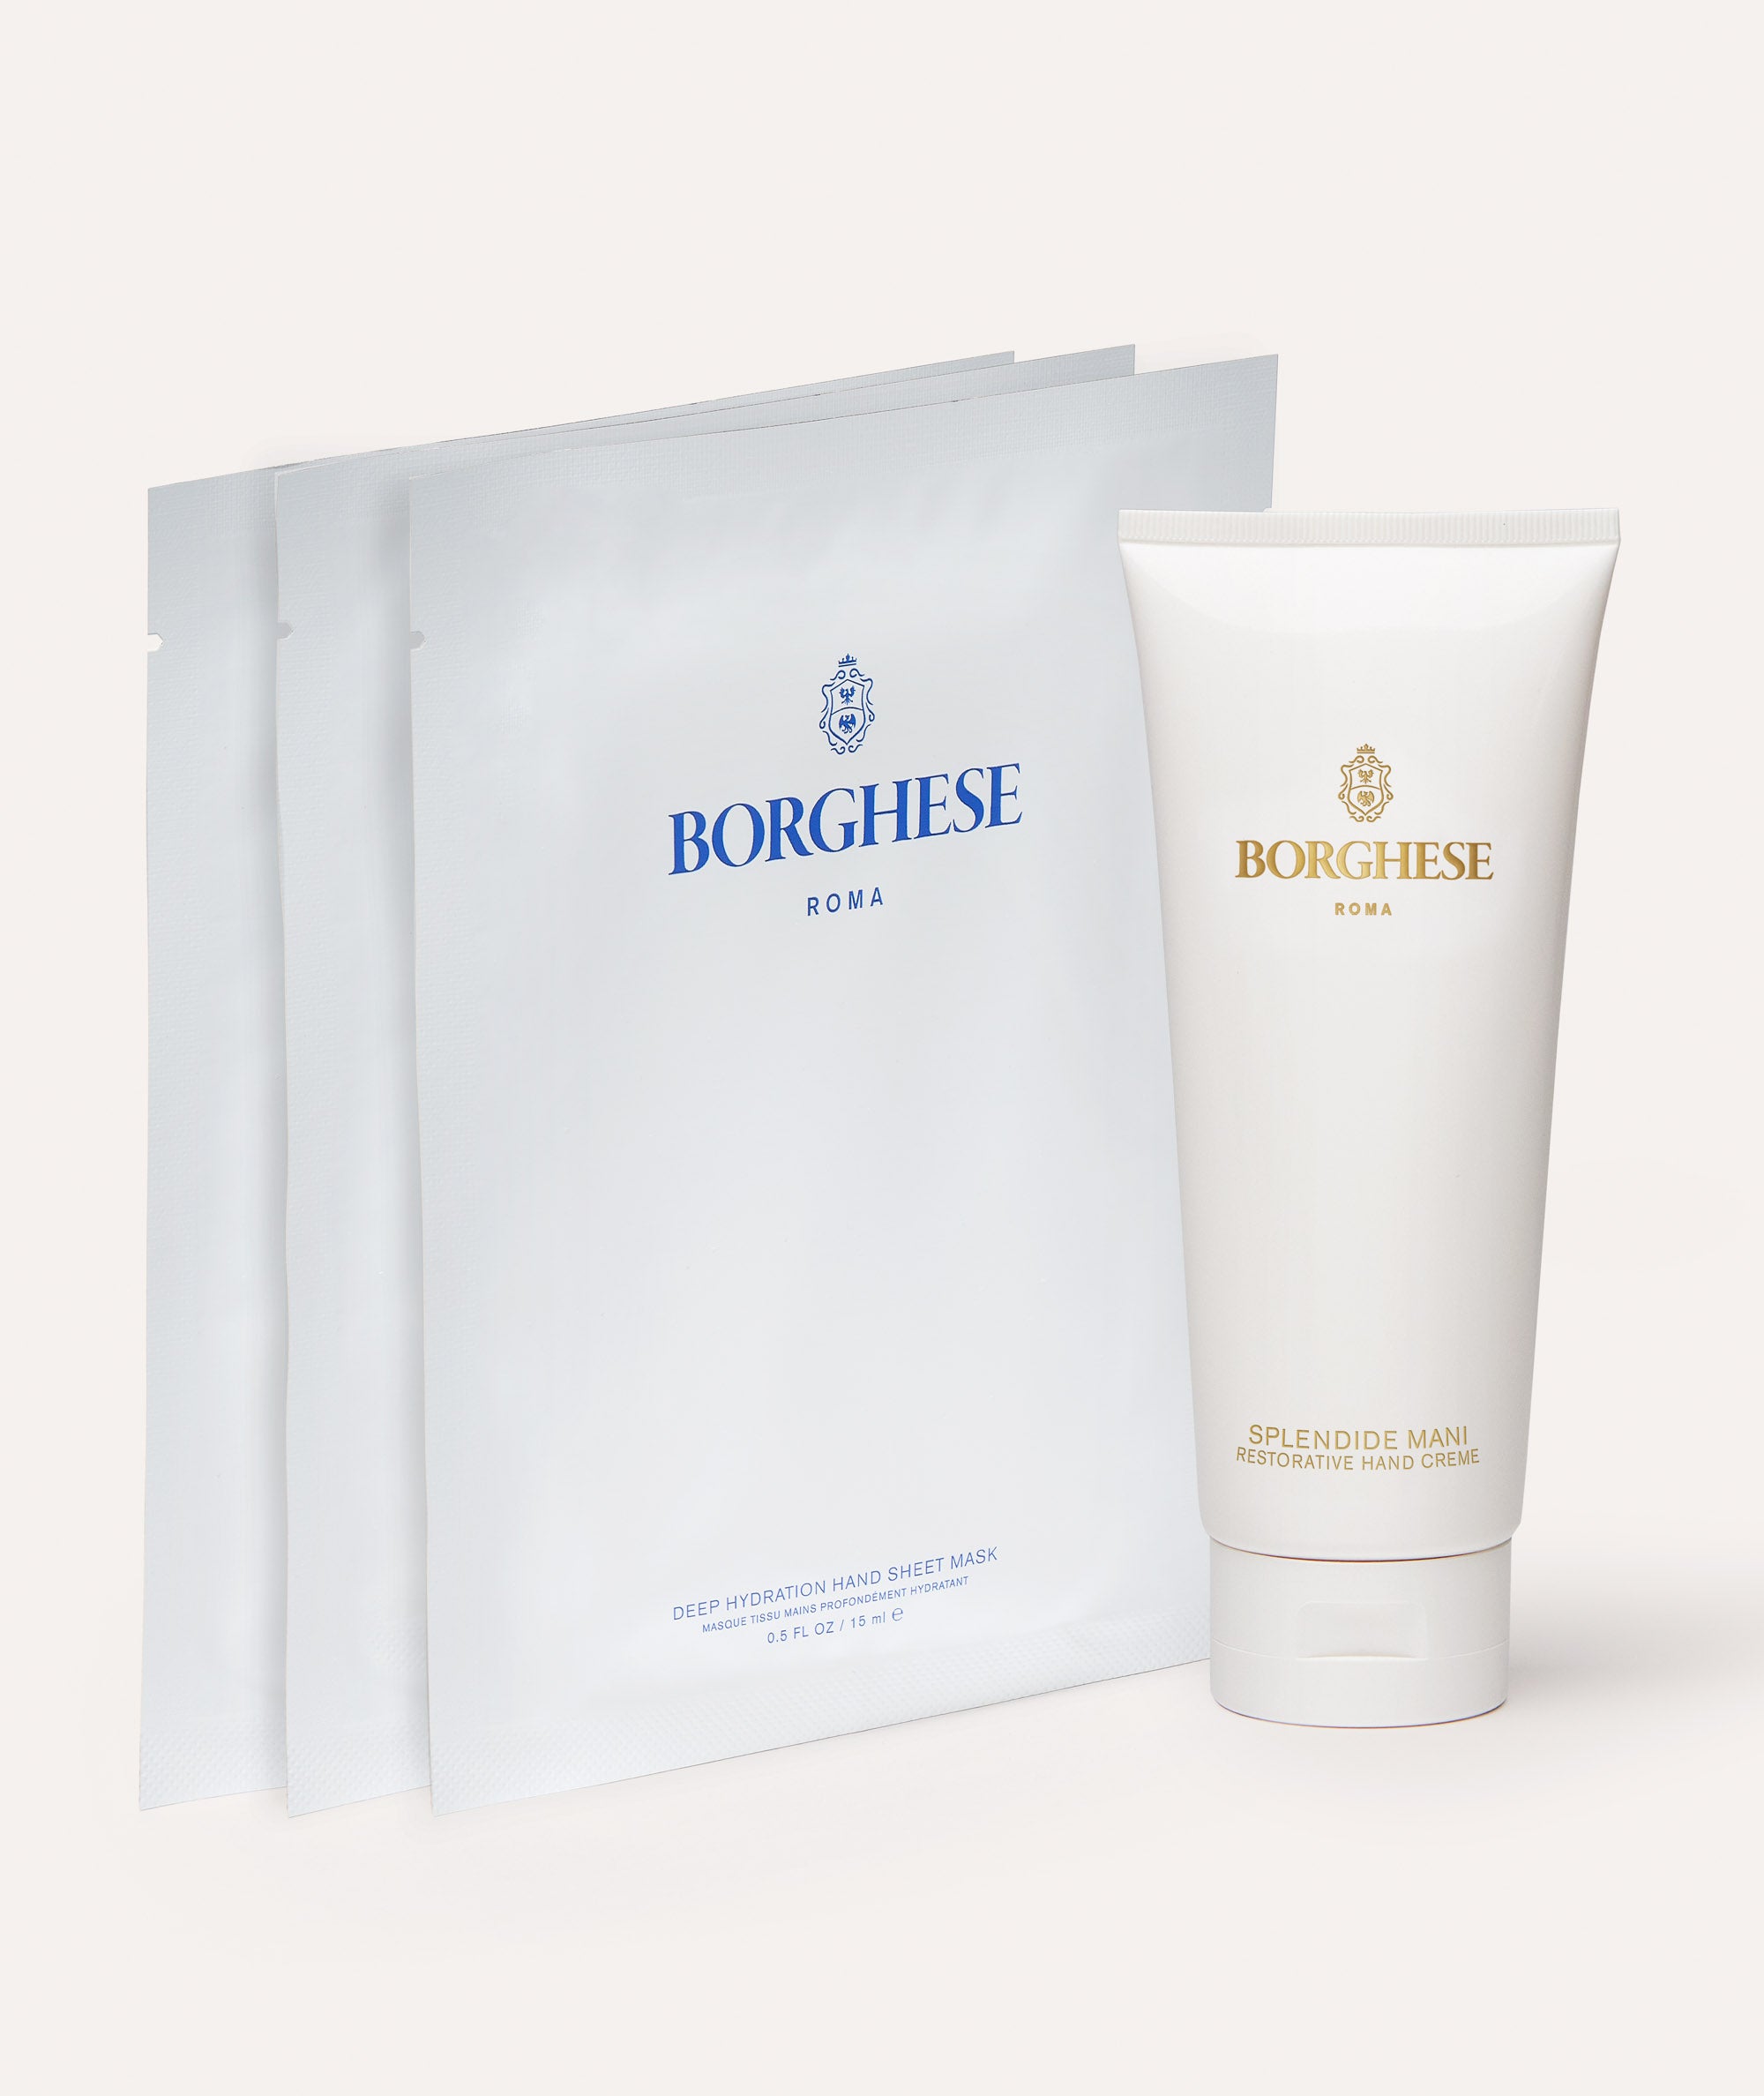 Picture of the contents of the 2-Piece Borghese Hand Care Set which includes Deep Hydration Hand Sheet Masks and Splendide Mani Restorative Hand Creme